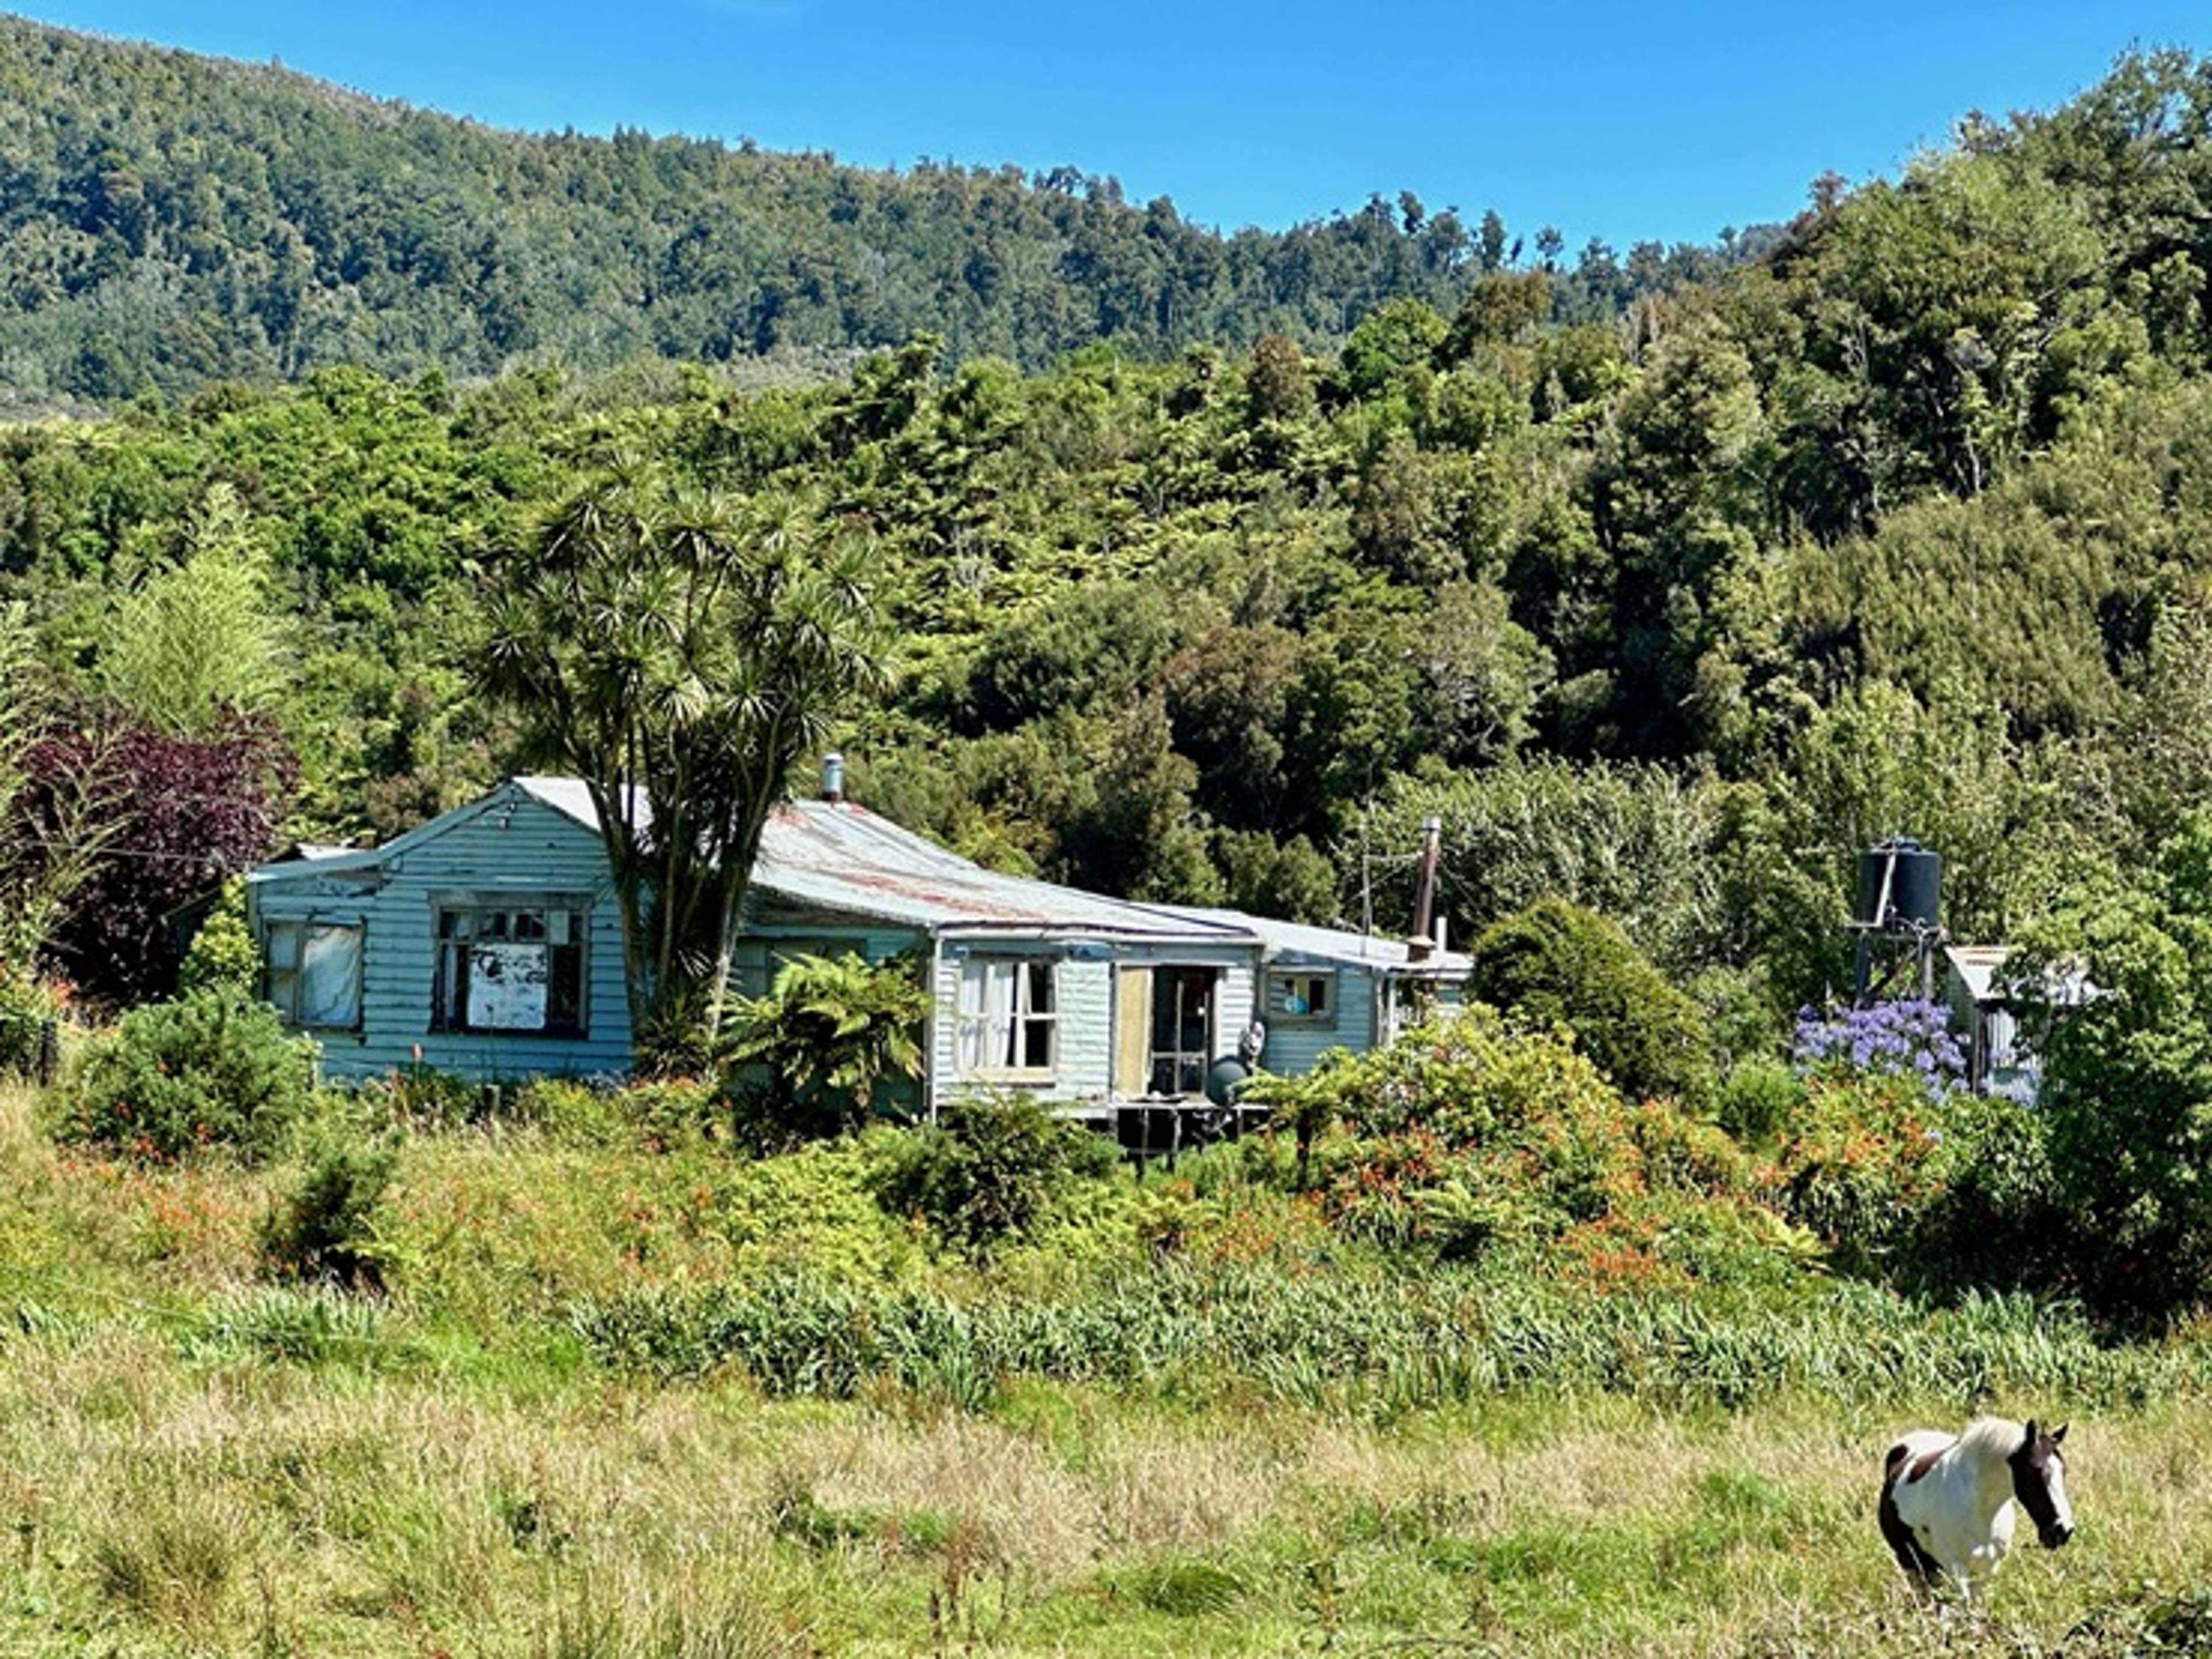 Californian ‘surfer dude’ offers to buy ‘munted’ house in Kiwi coal mining town